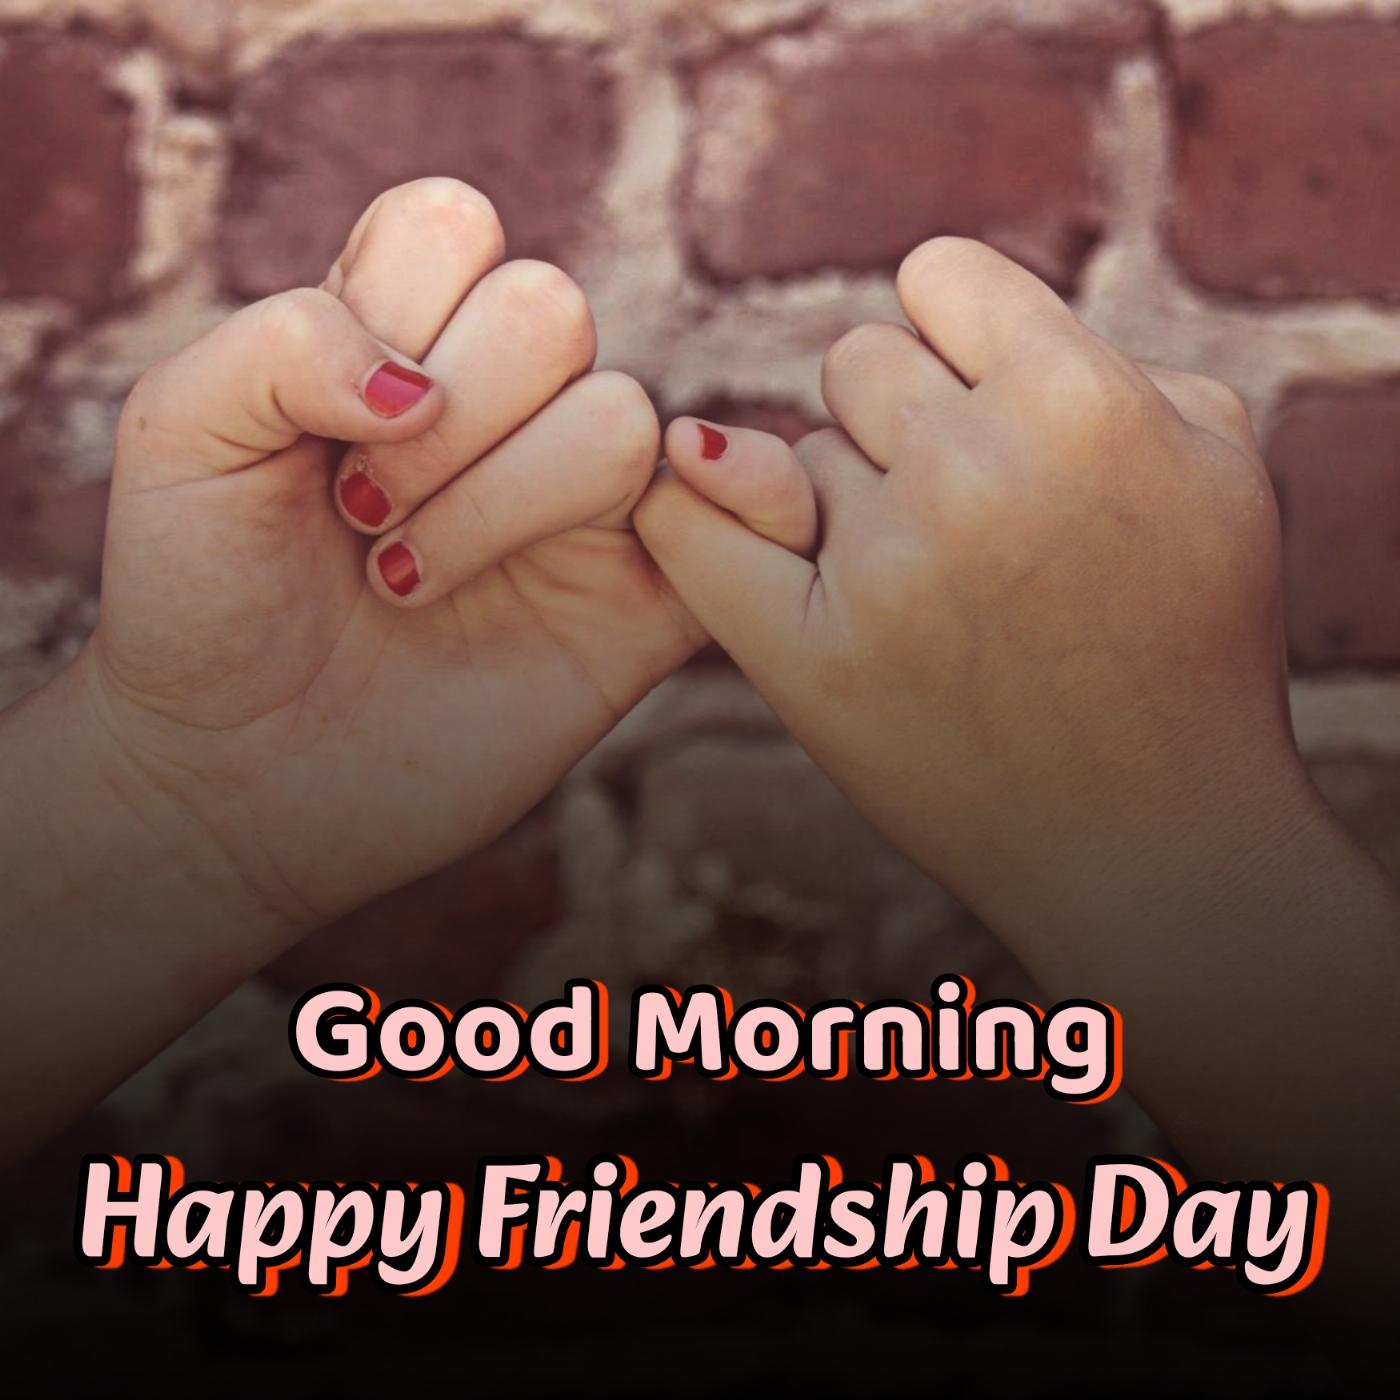 Good Morning Happy Friendship Day Images